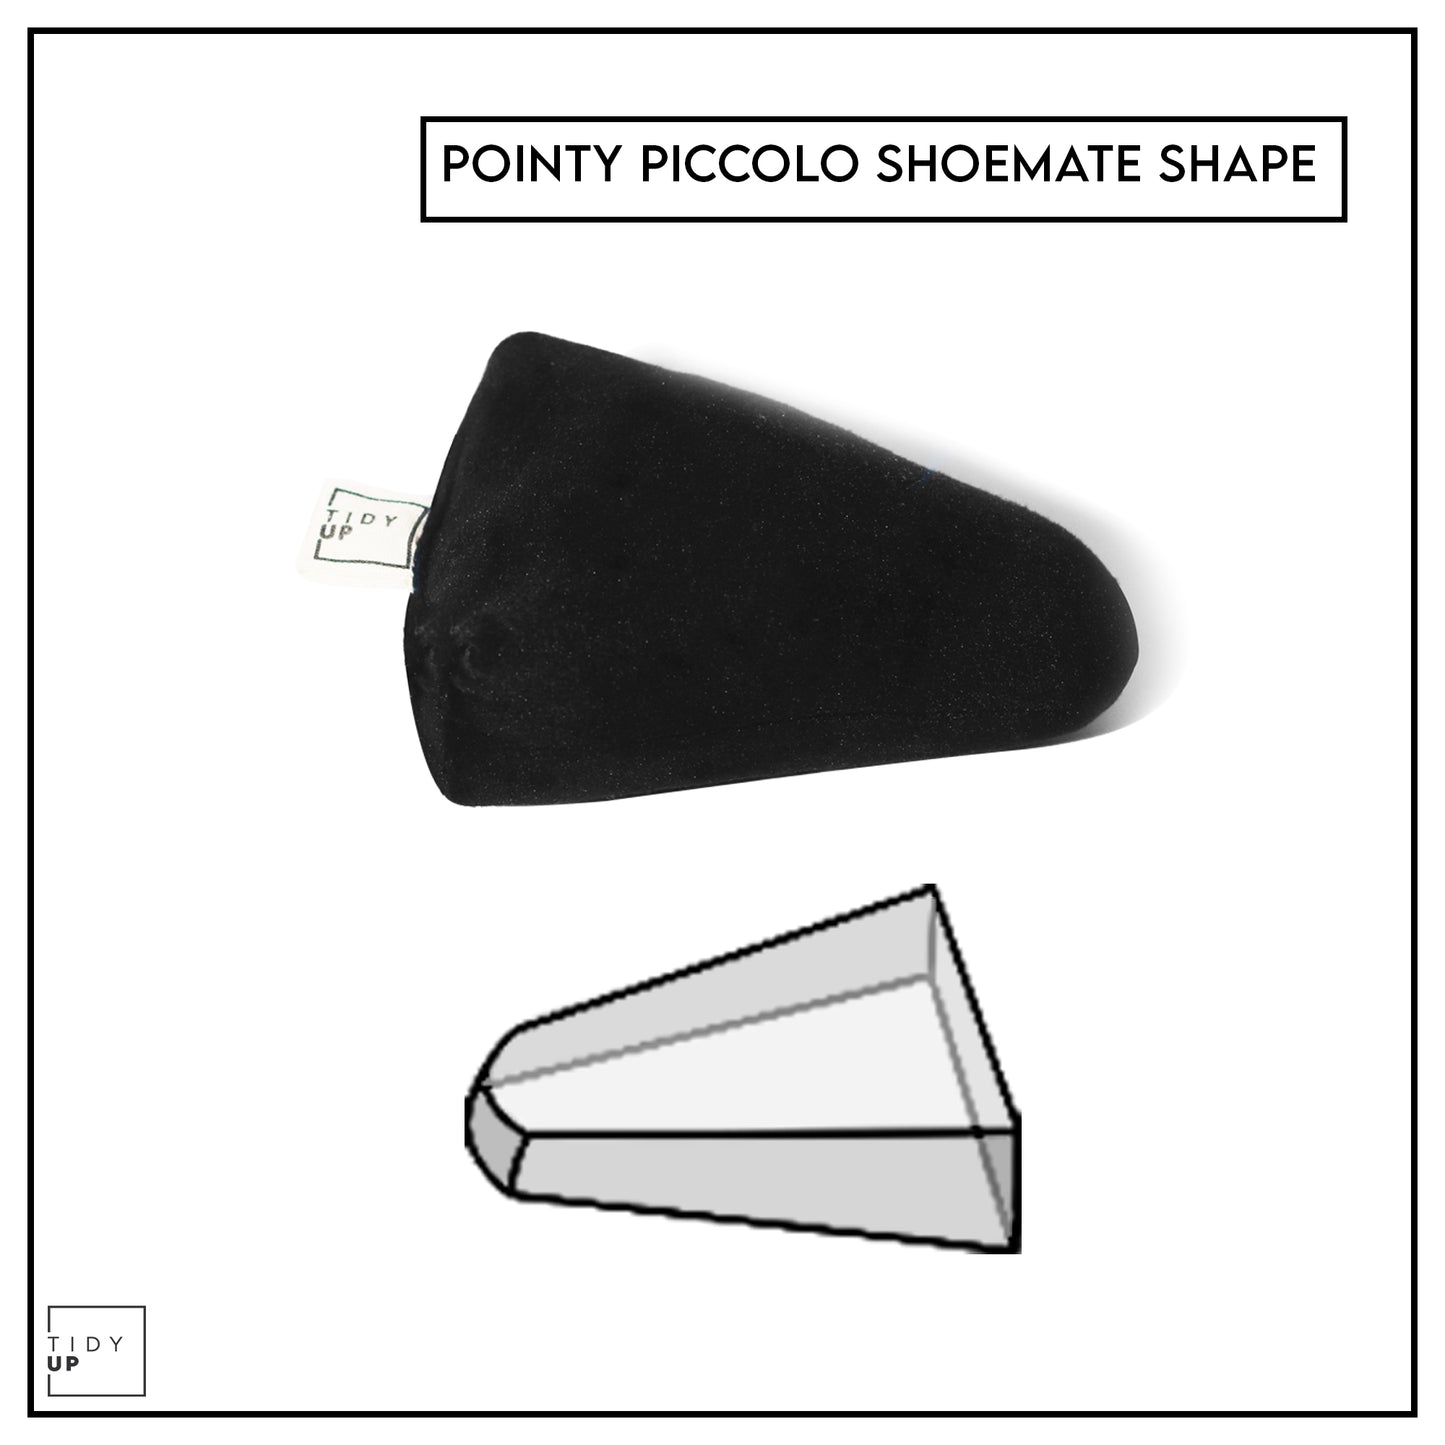 Pointy Piccolo Shoemate